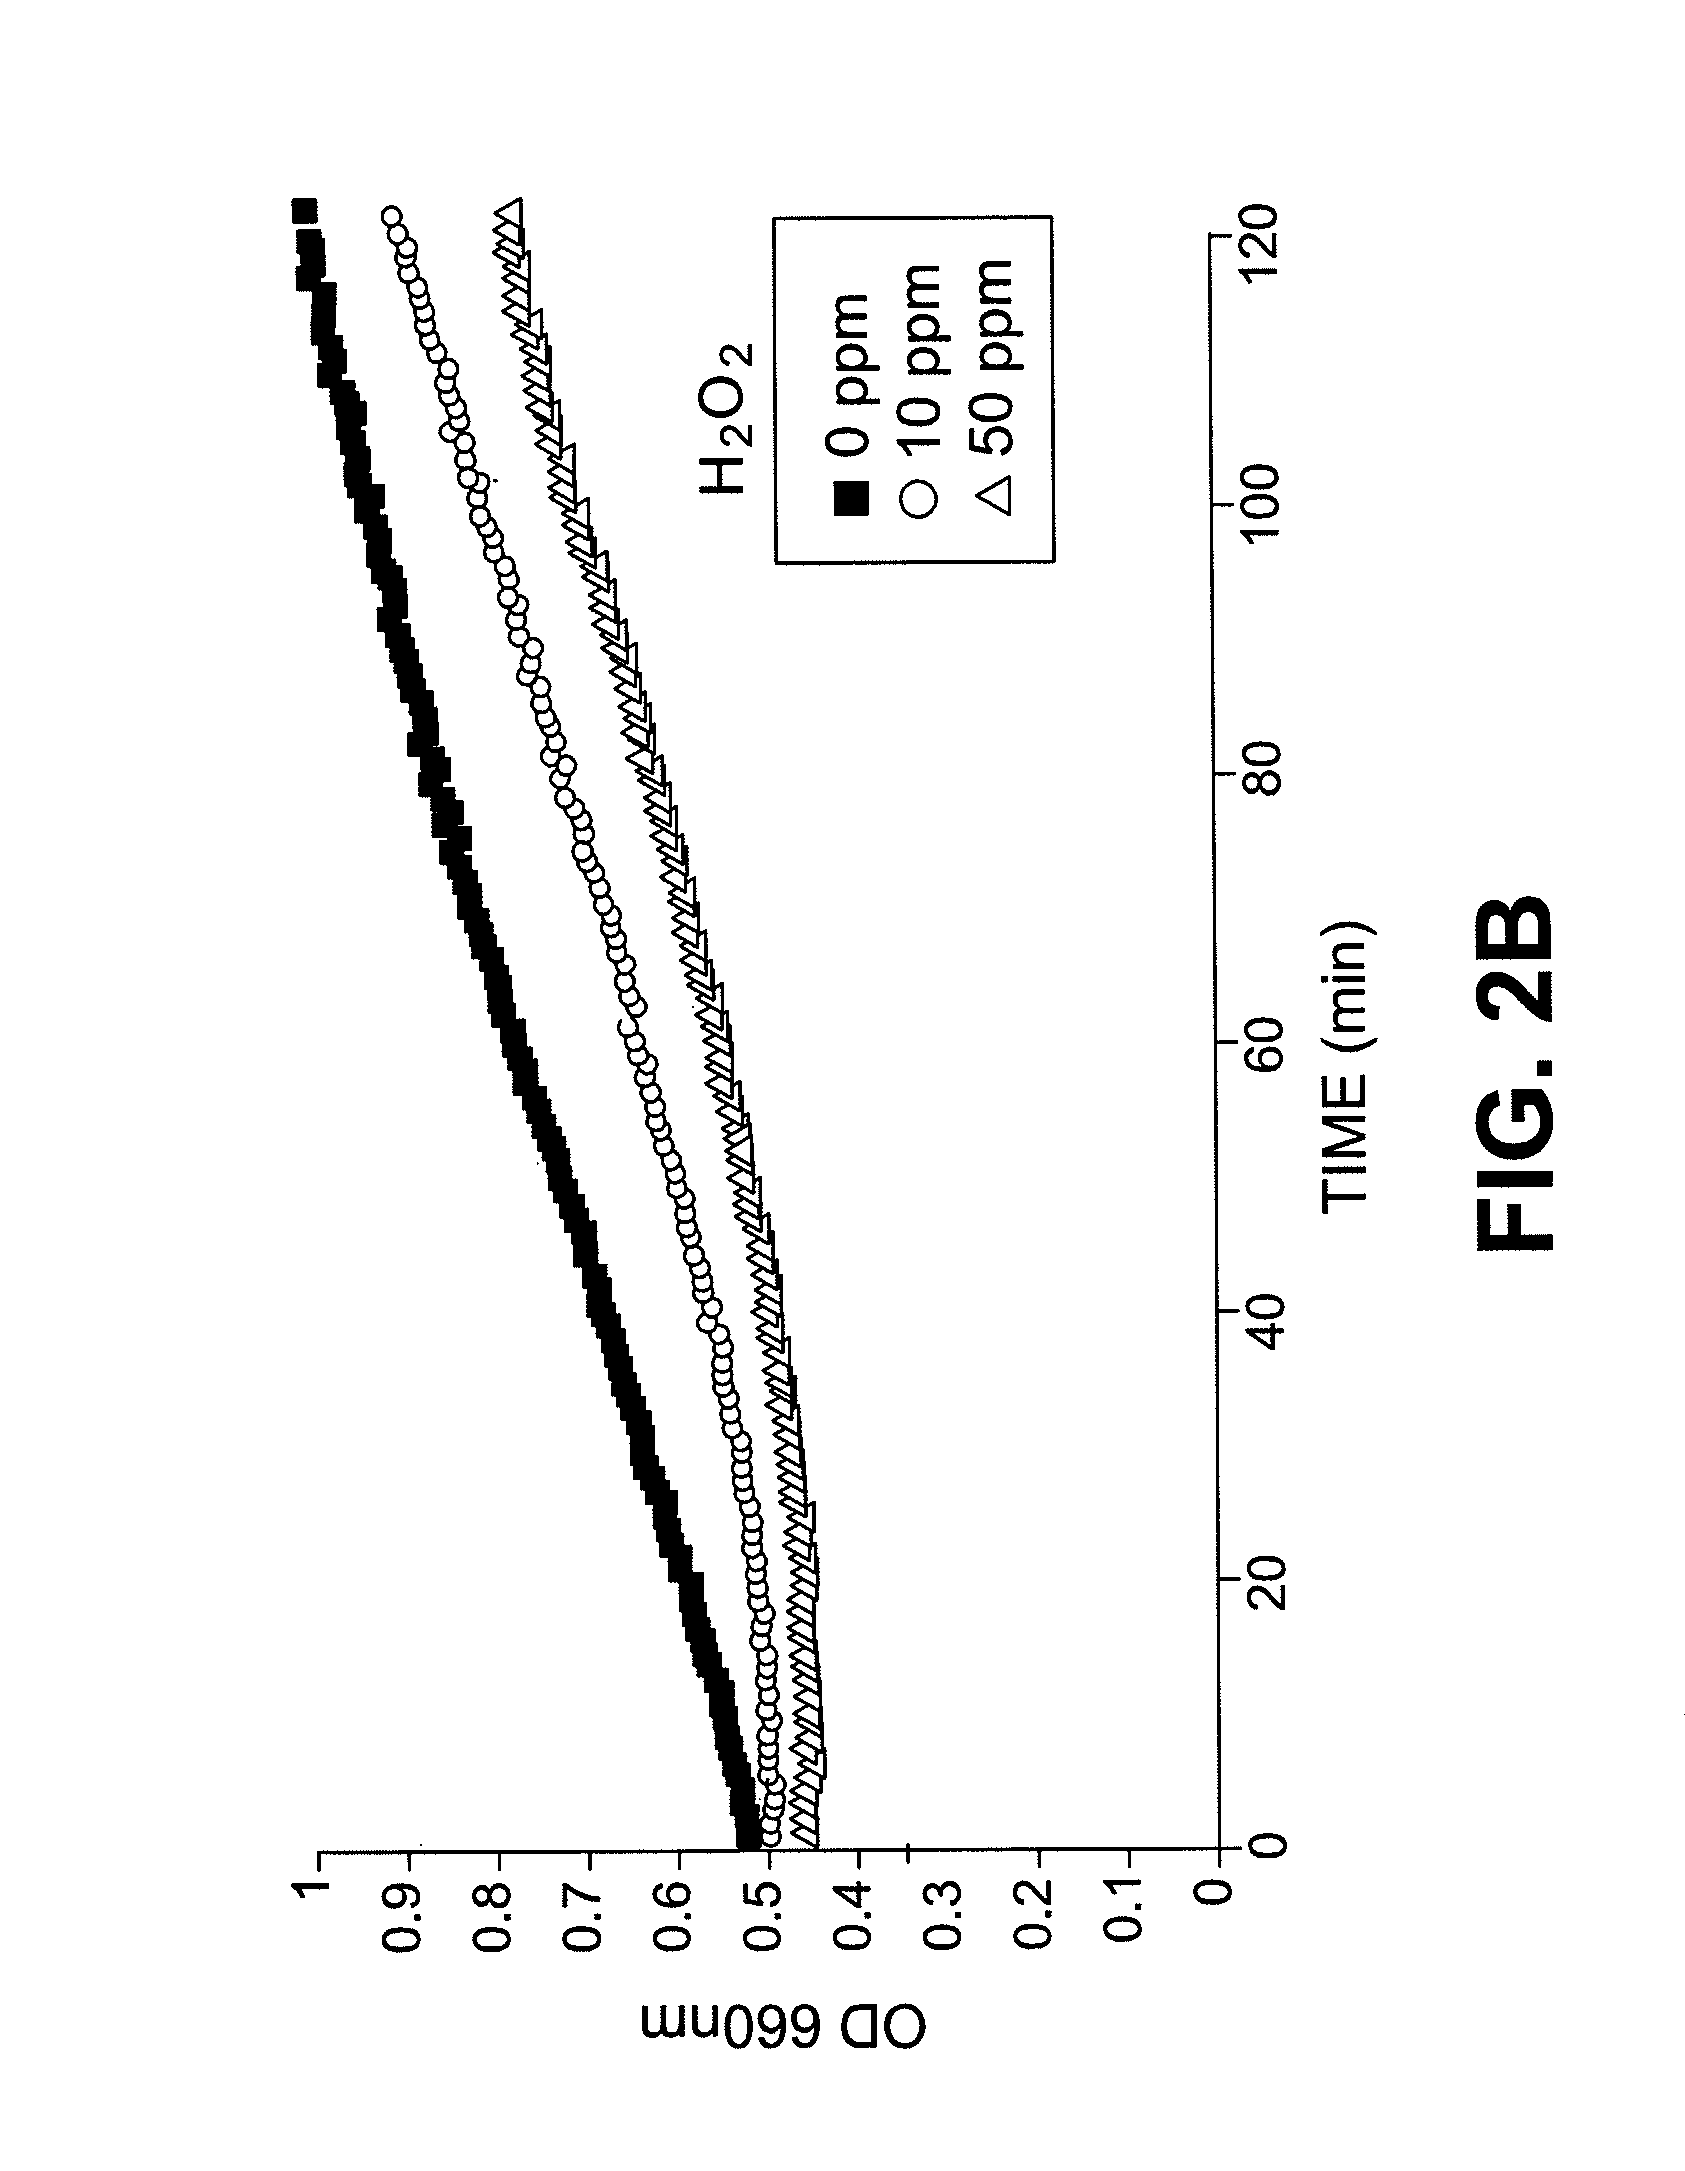 Method for the production of a fermentation product from a pretreated lignocellulosic feedstock